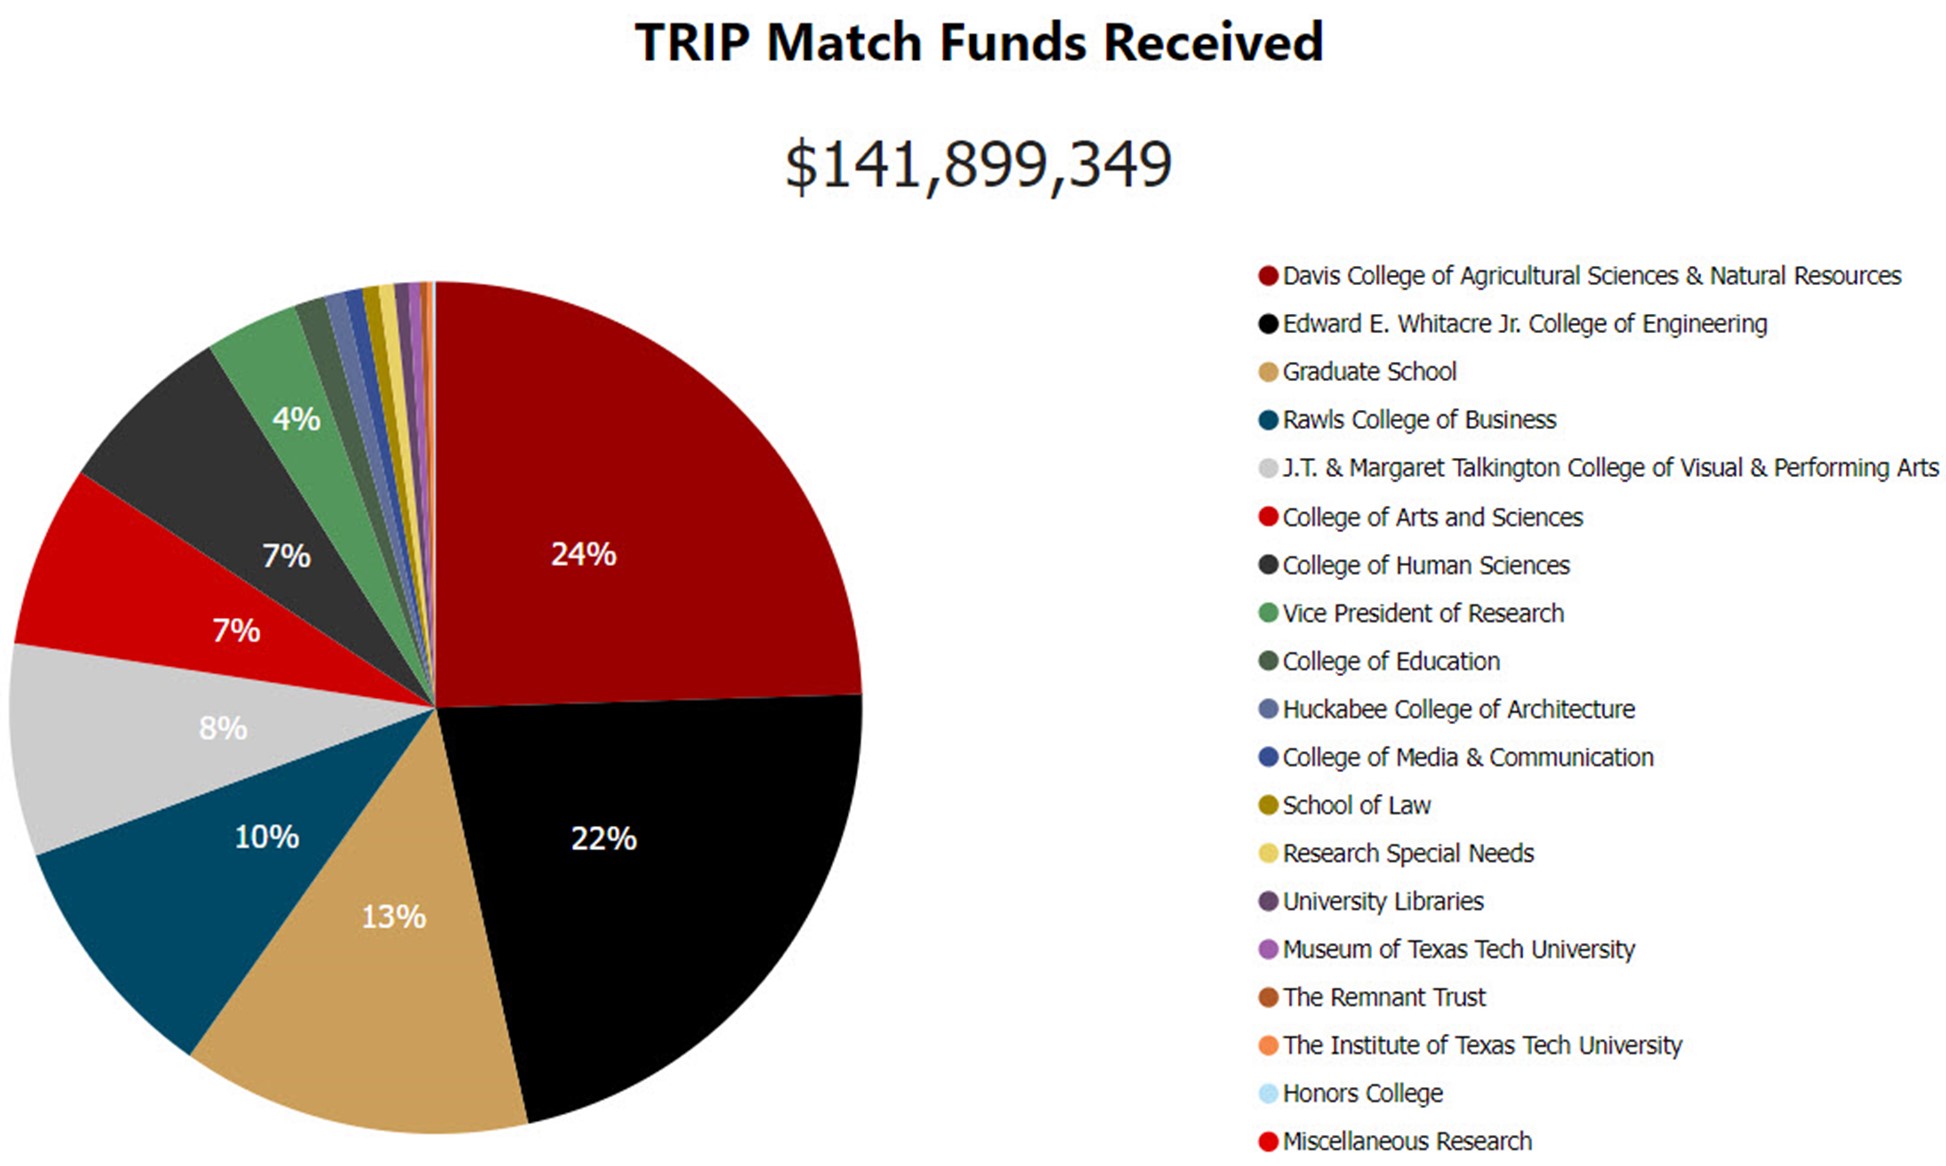 TRIP Match Funds Received